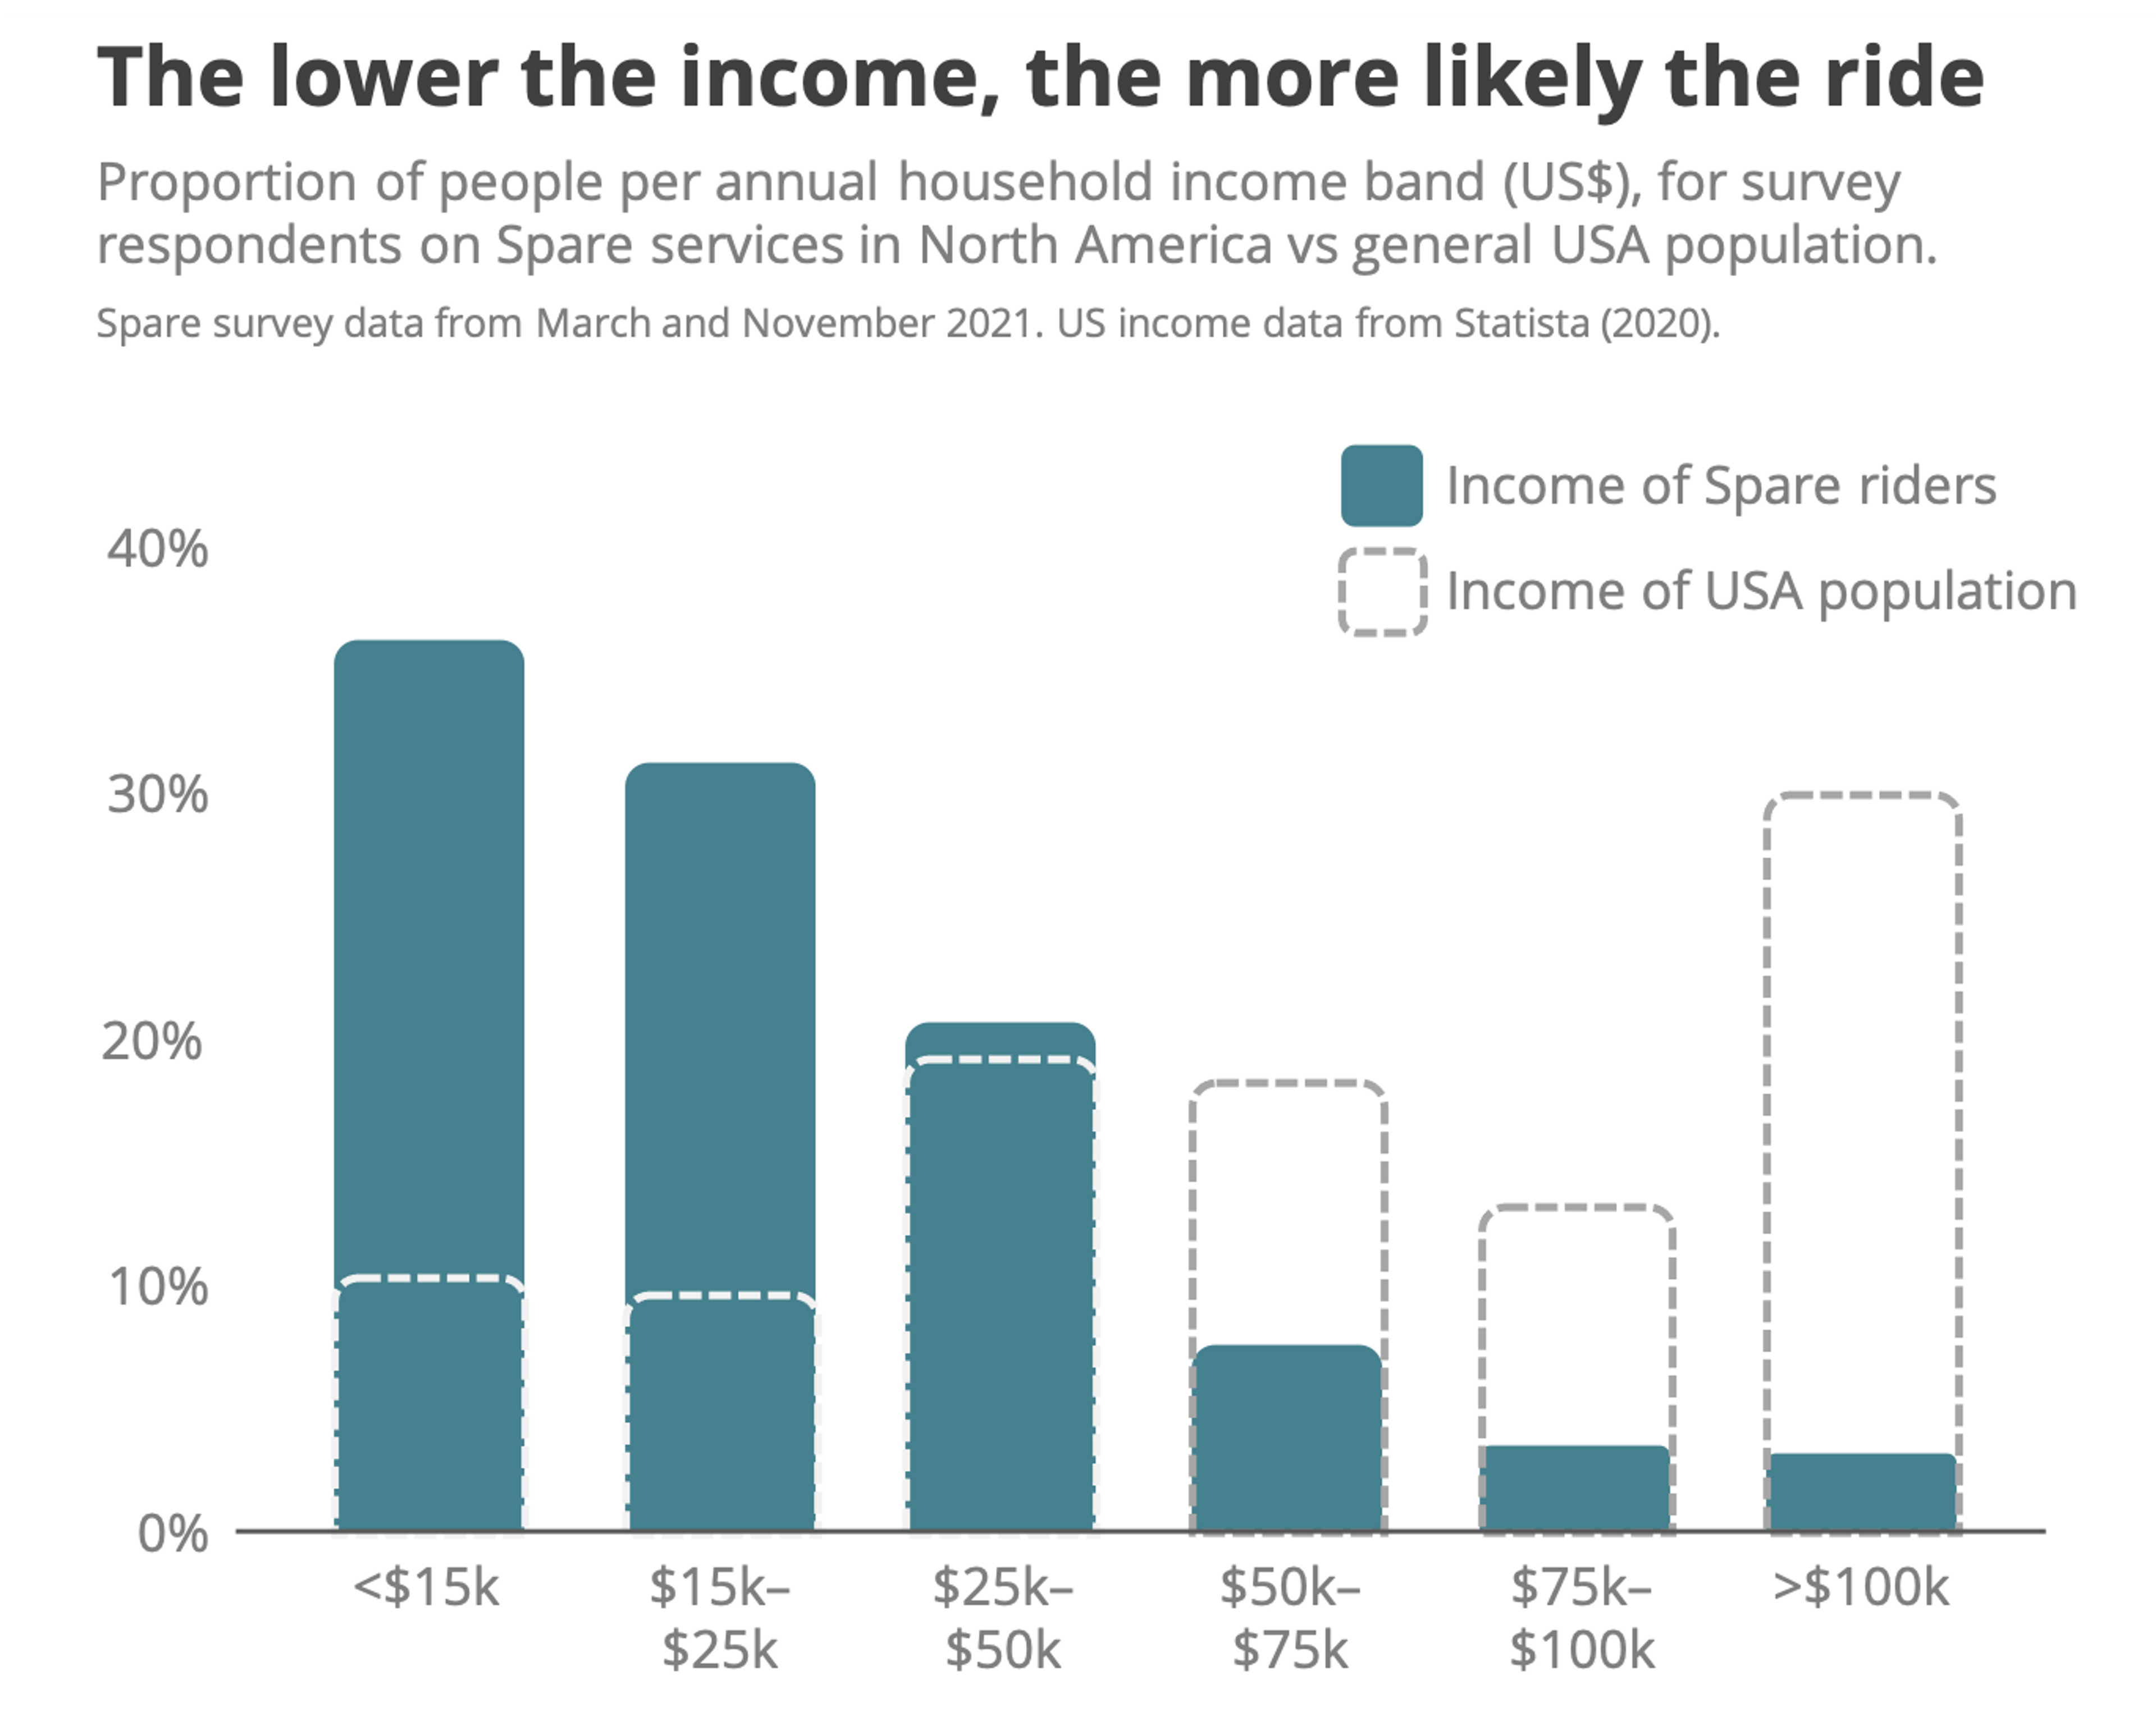 Income and ride probability